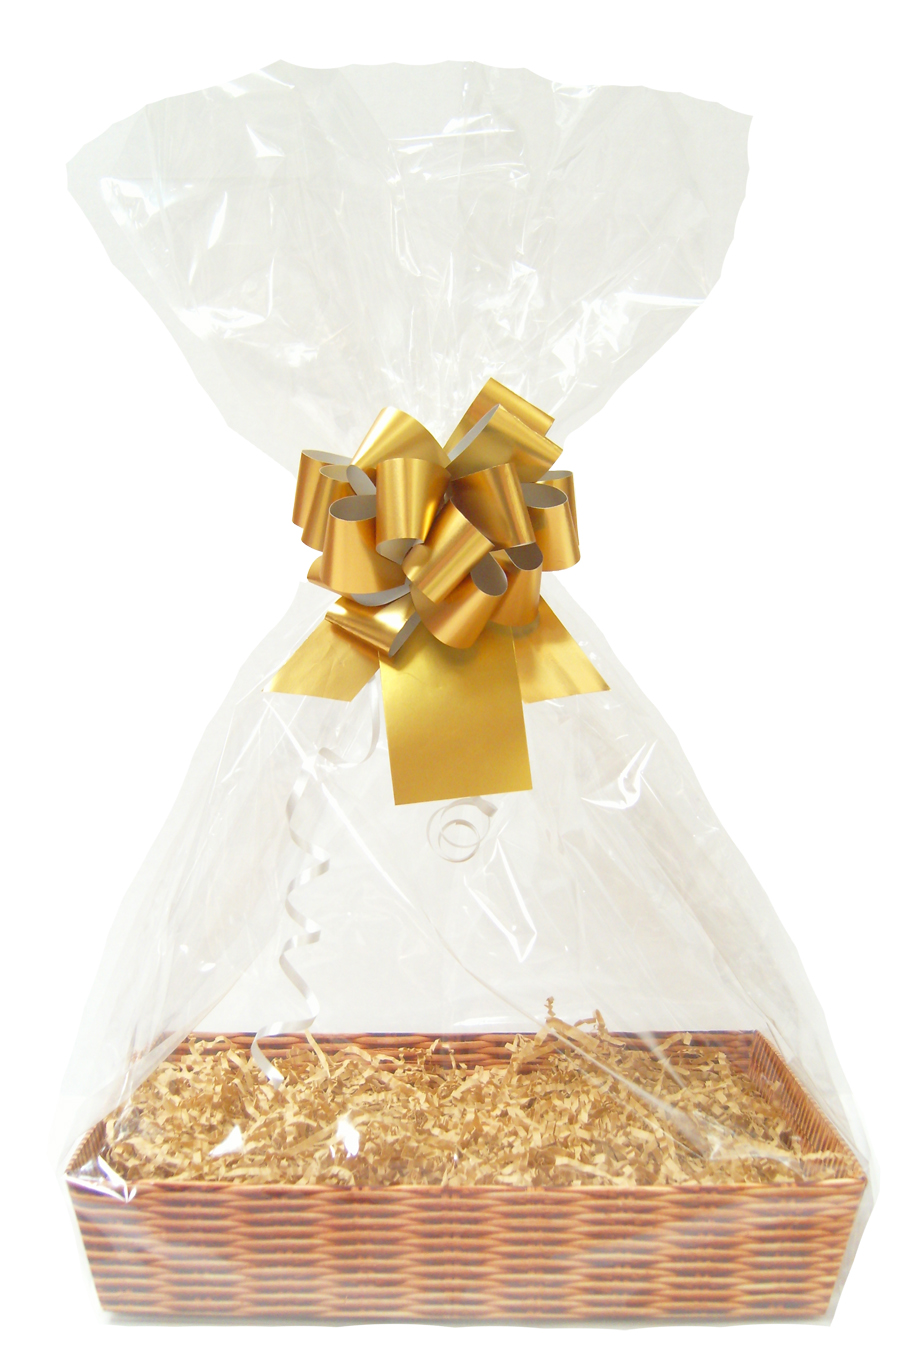 Gift Basket Accessory Kit - 21x16 - GOLD SIZE A  [Basket not included]